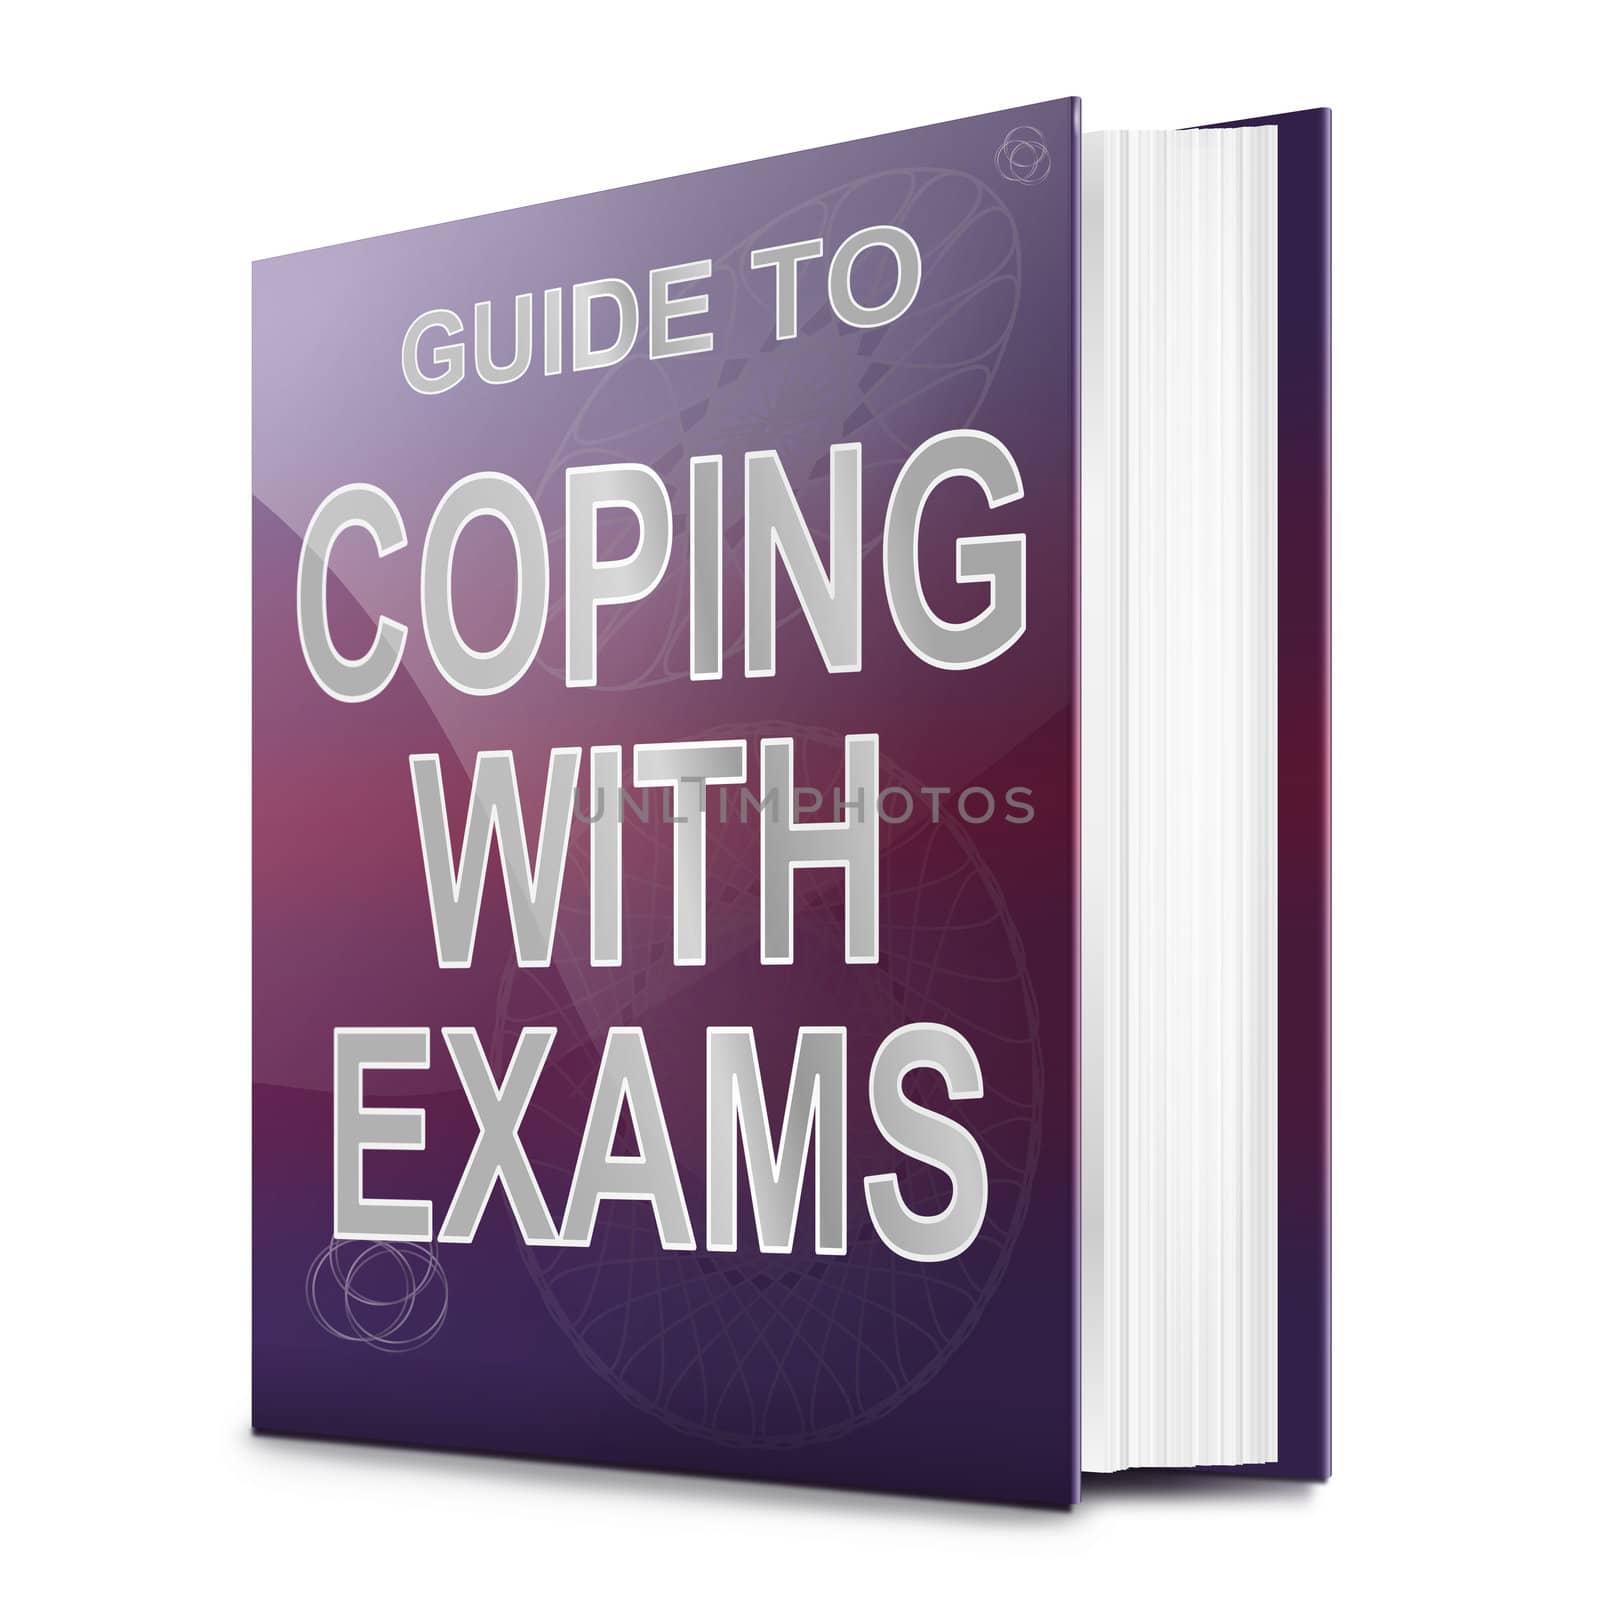 Illustration depicting a book with a coping with exams concept title. White background.